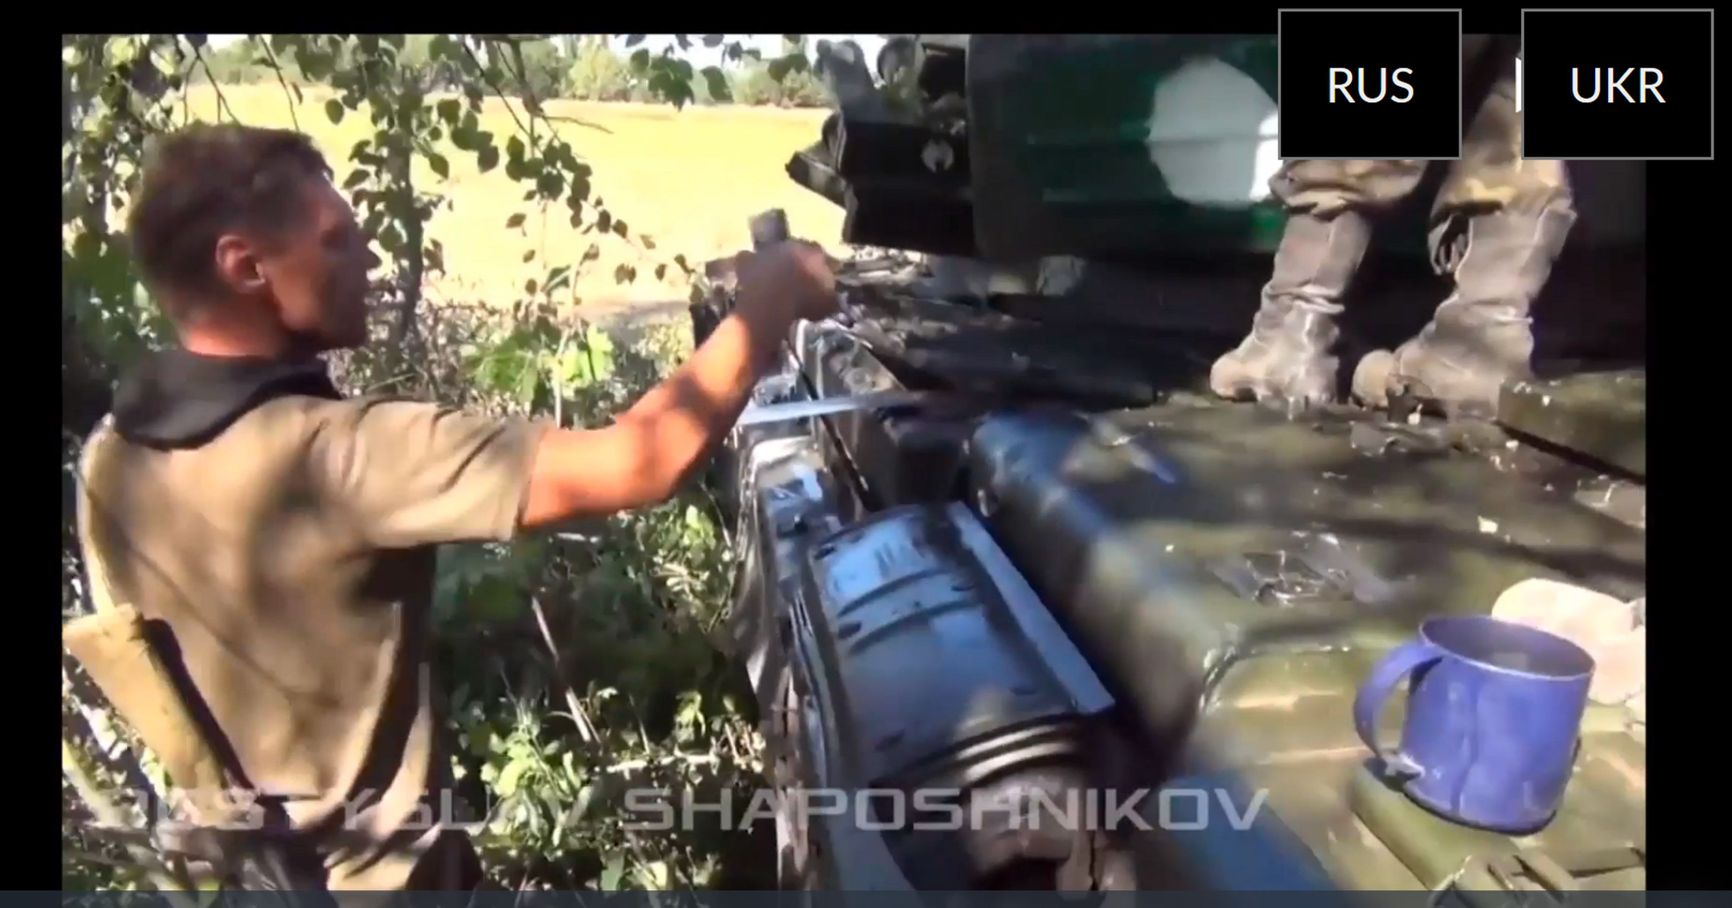 Russian tank in Ilovaisk. Screenshot from the Battle of Ilovaisk project website